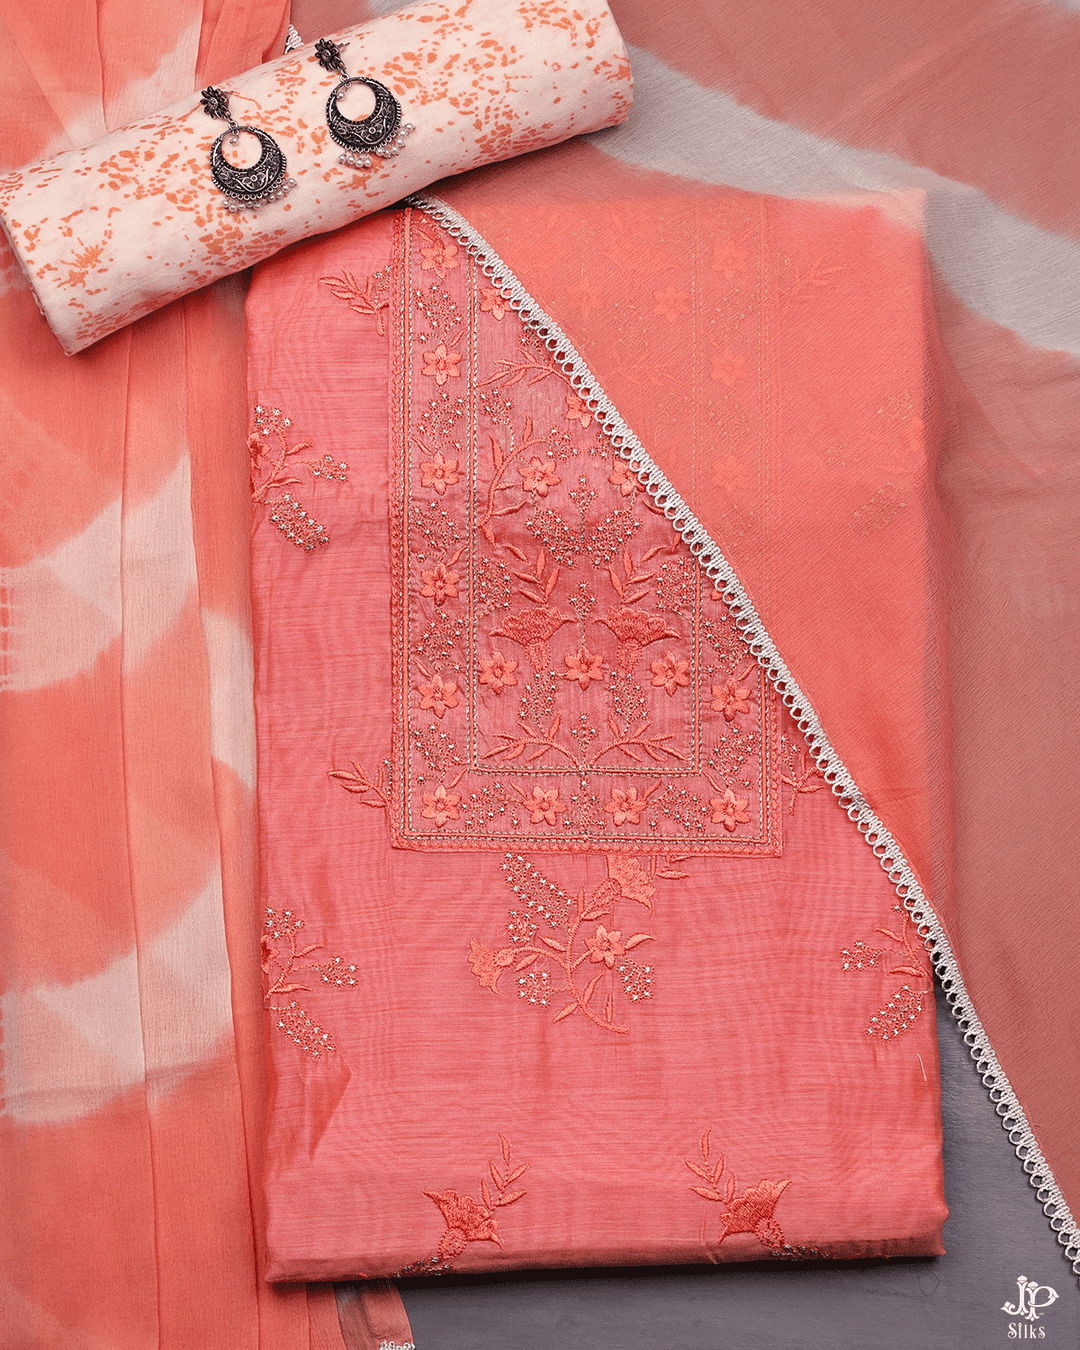 Peach Unstitched Chudidhar Material - D6645 - View 1